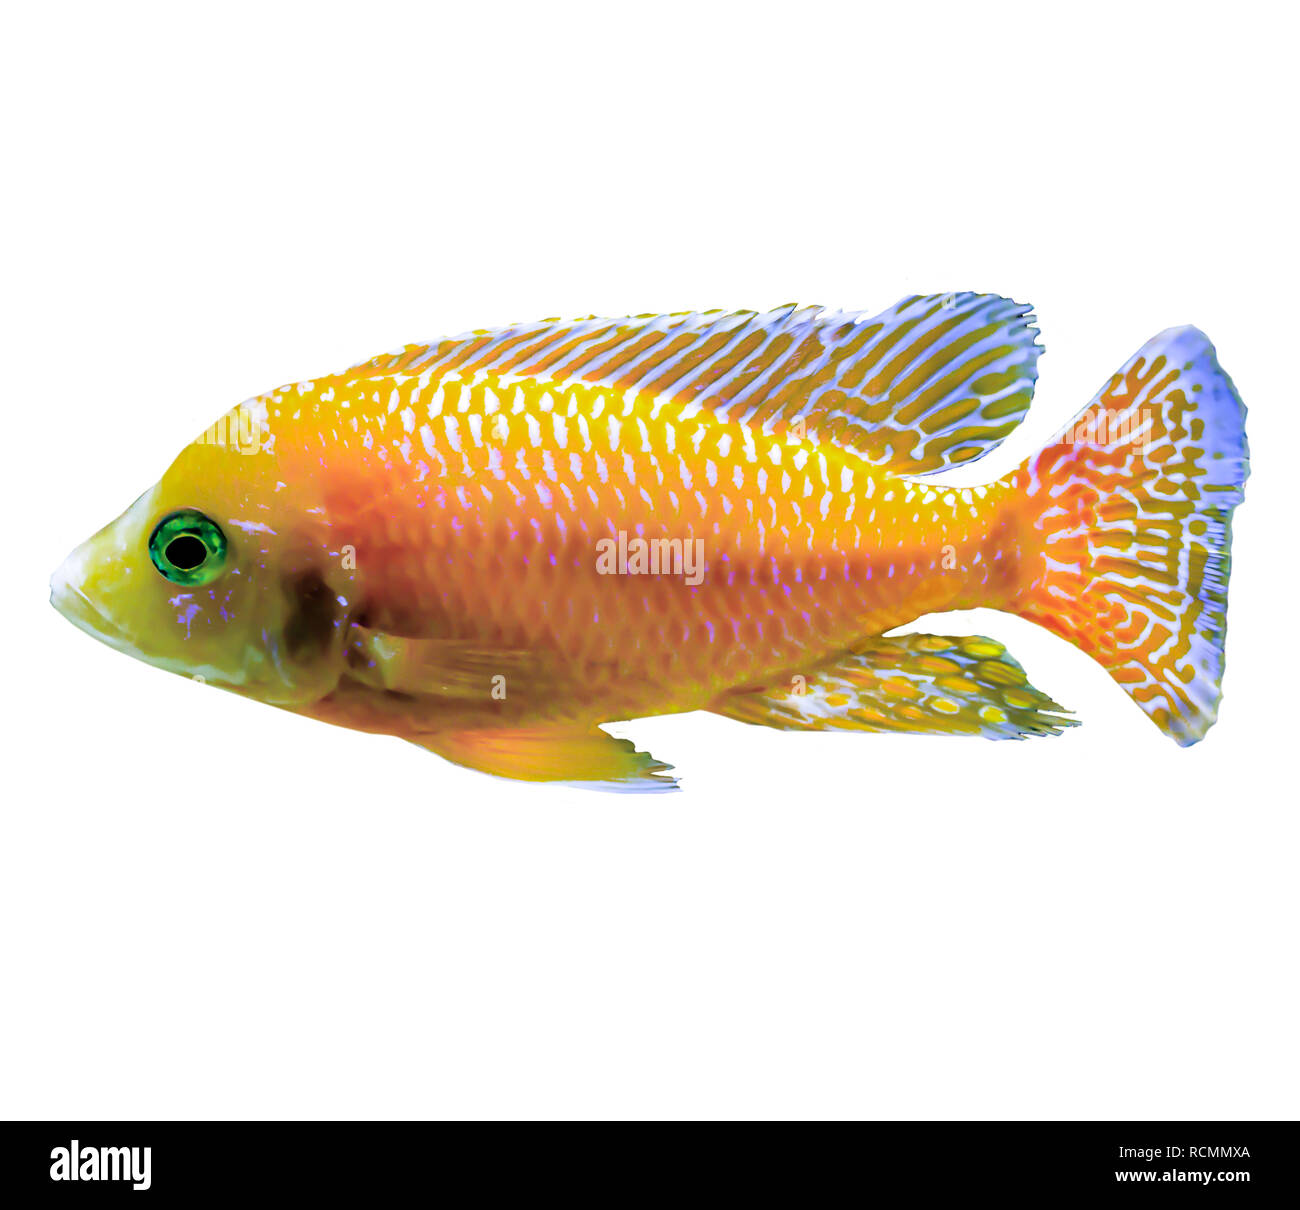 Orange tropical fish from the Indian Ocean. Pseudanthias .Isolated photo on white background. Website about nature ,aquarium fish, life in the ocean . Stock Photo